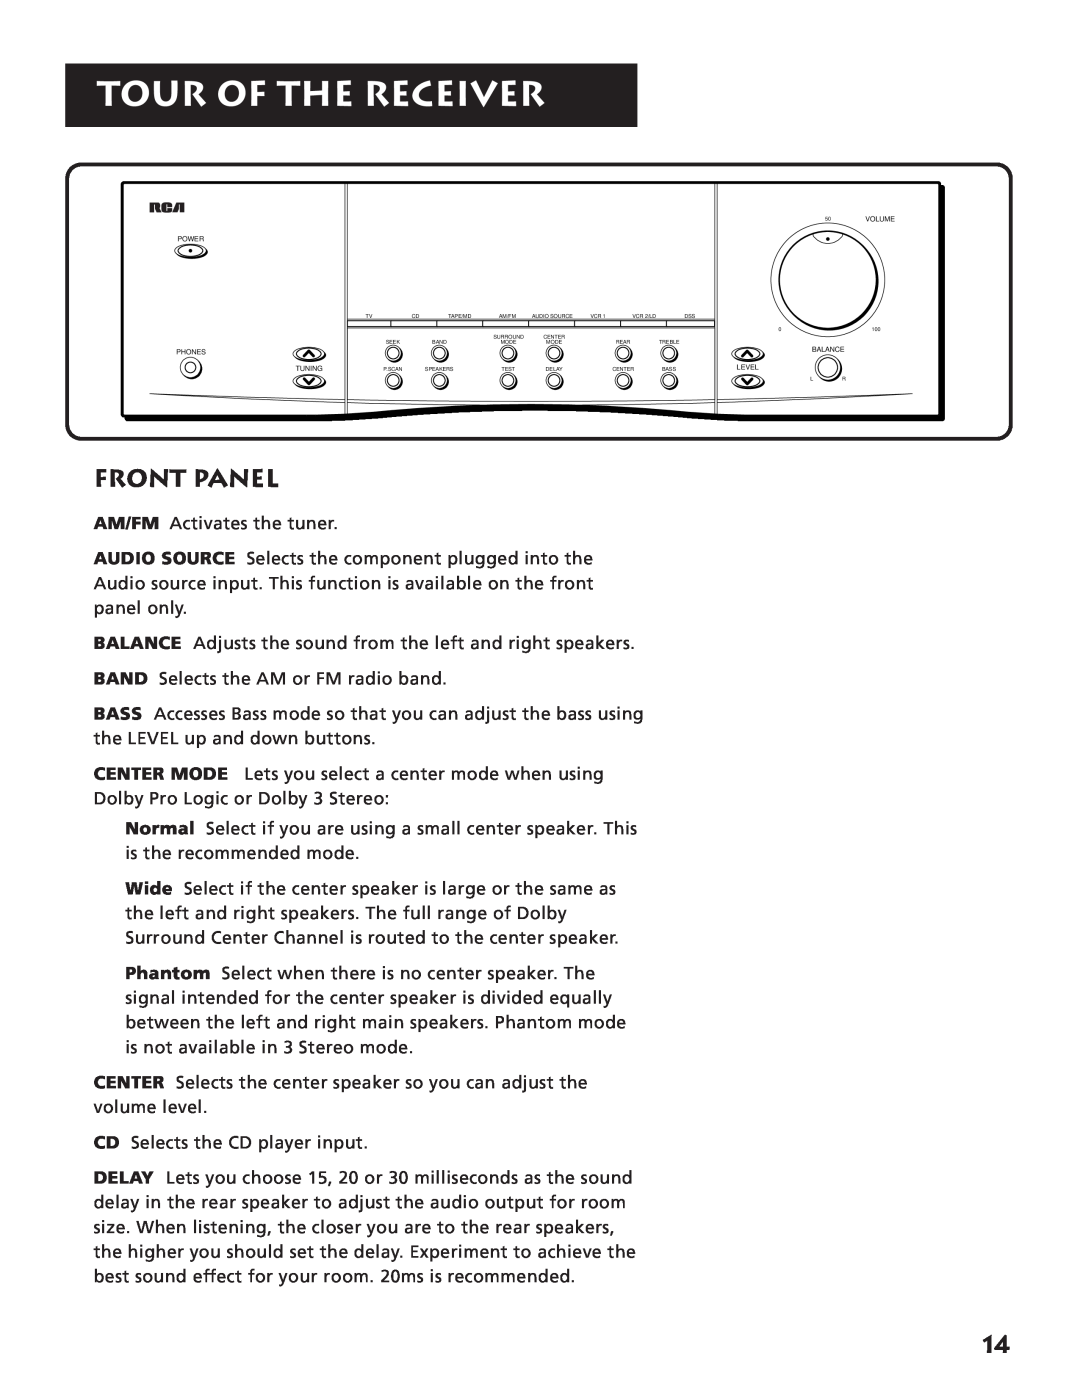 RCA RV3693 manual Front Panel, Tour Of The Receiver 